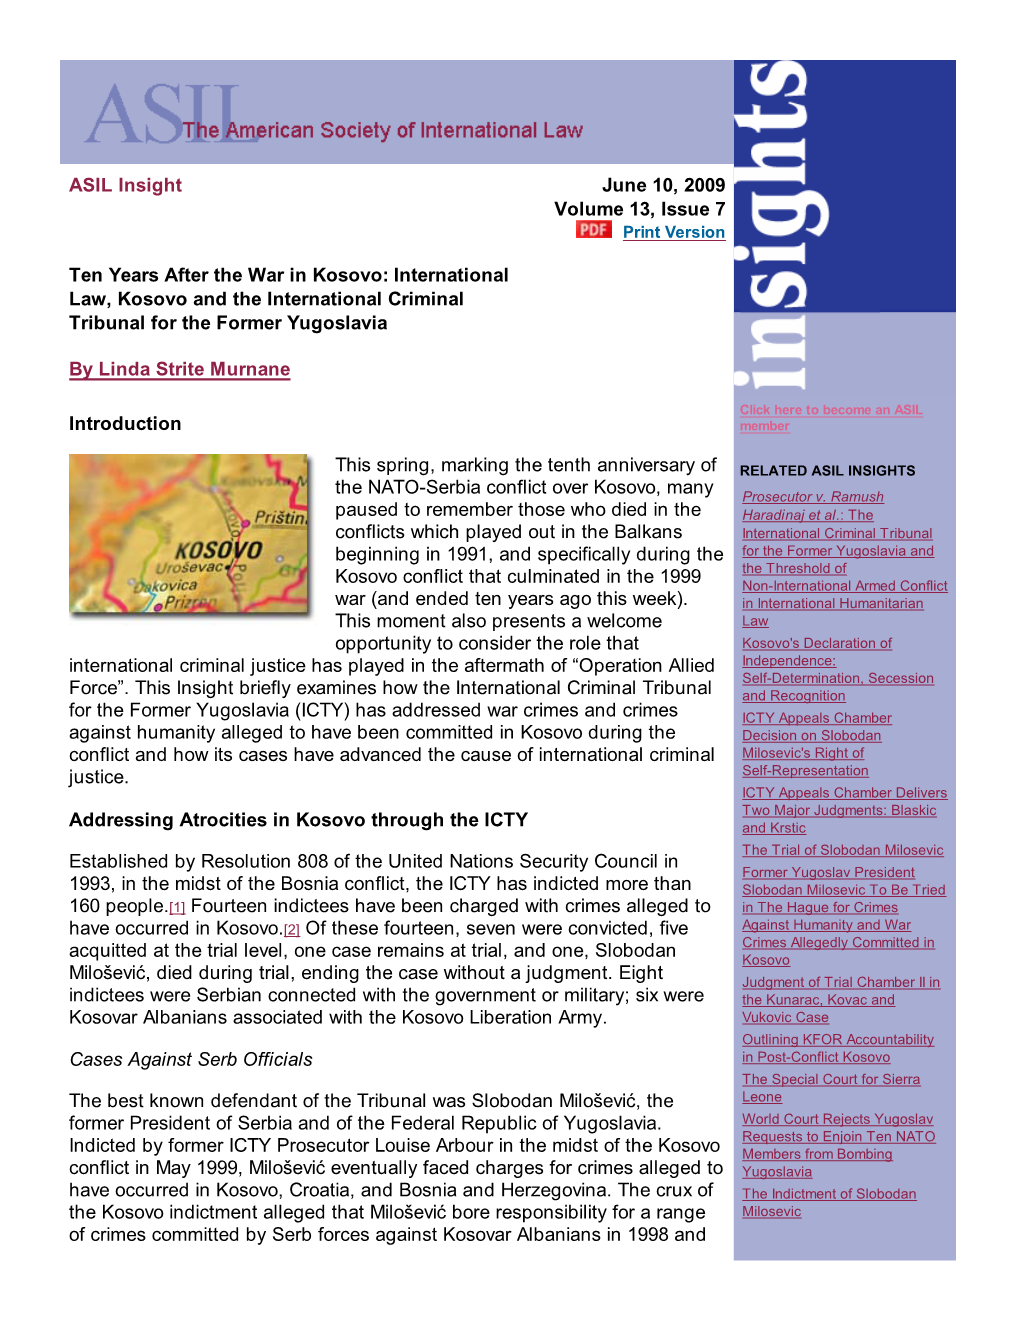 ASIL Insight June 10, 2009 Volume 13, Issue 7 Ten Years After the War In